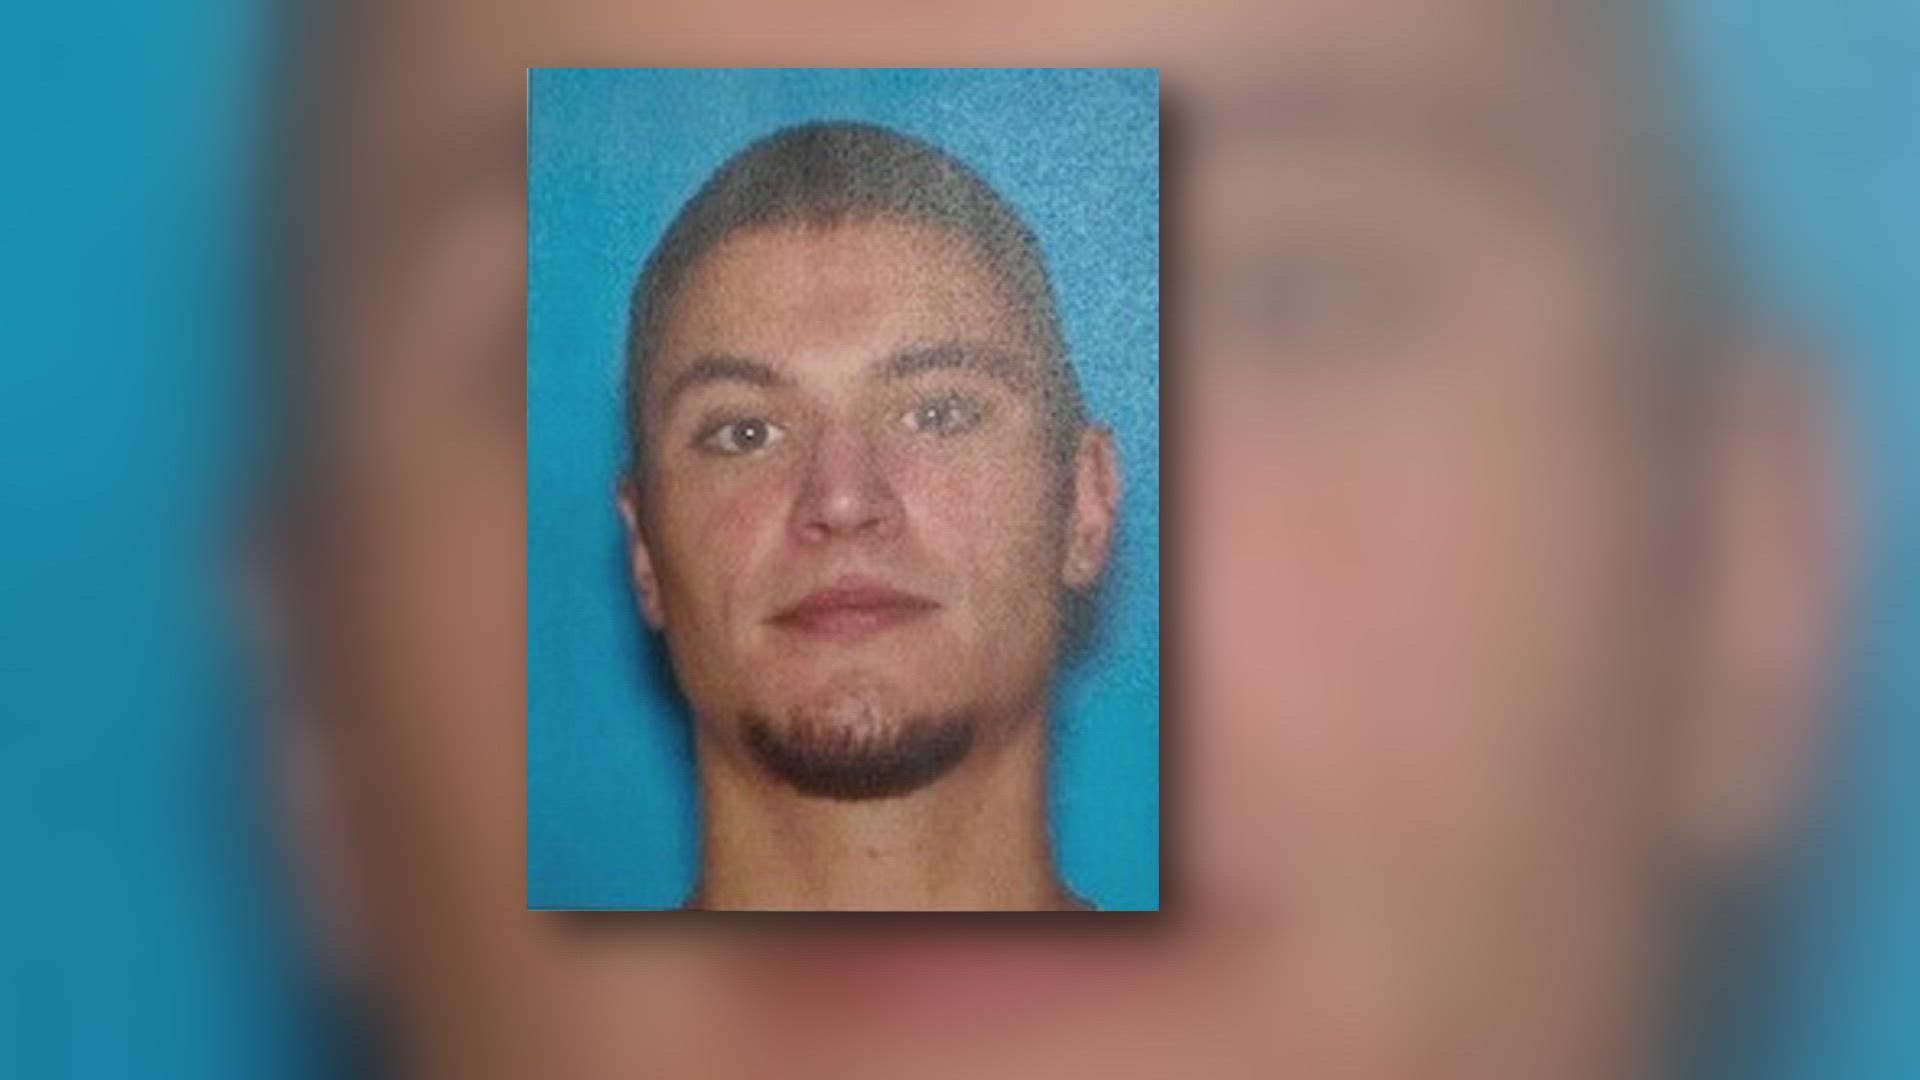 Michael K. Murphy Jr., 26, from Lapwai was last seen in March 2018. ISP said he was living in the Lewiston area at the time of his disappearance.